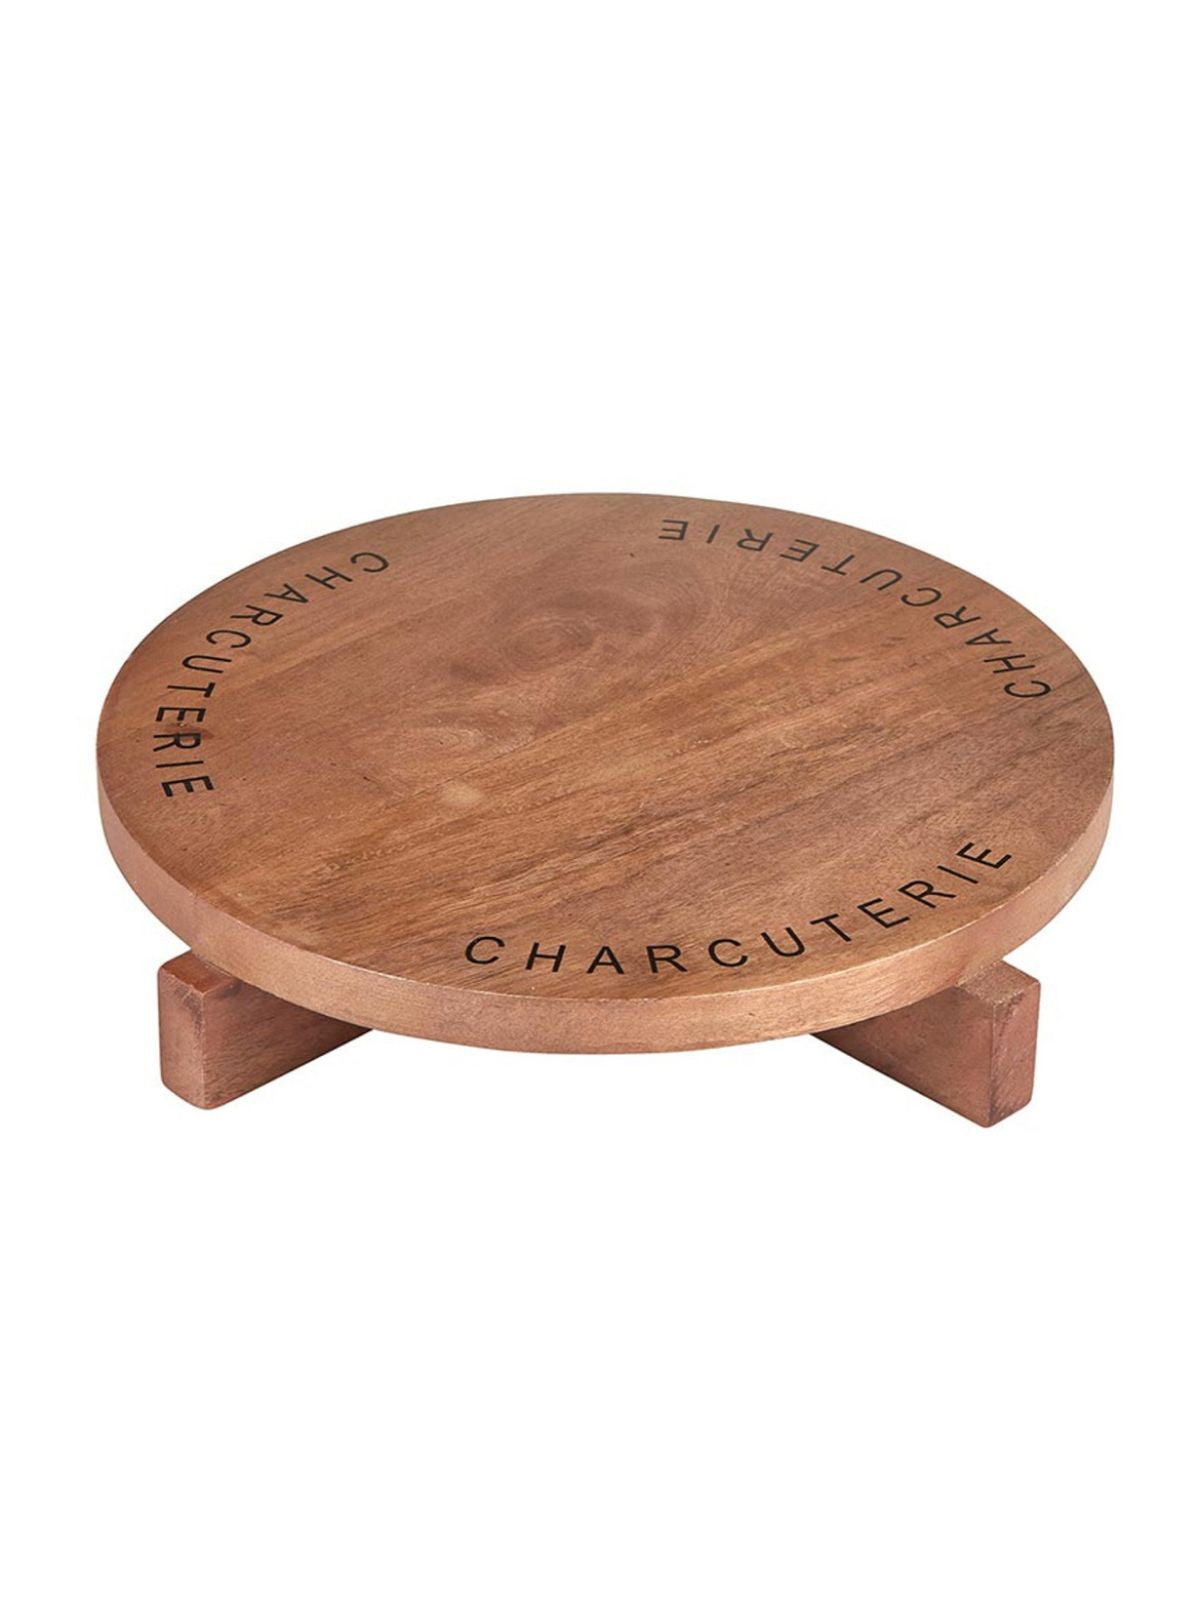 Charcuterie Pedestal Cheese Board Sold by KYA Home Decor.